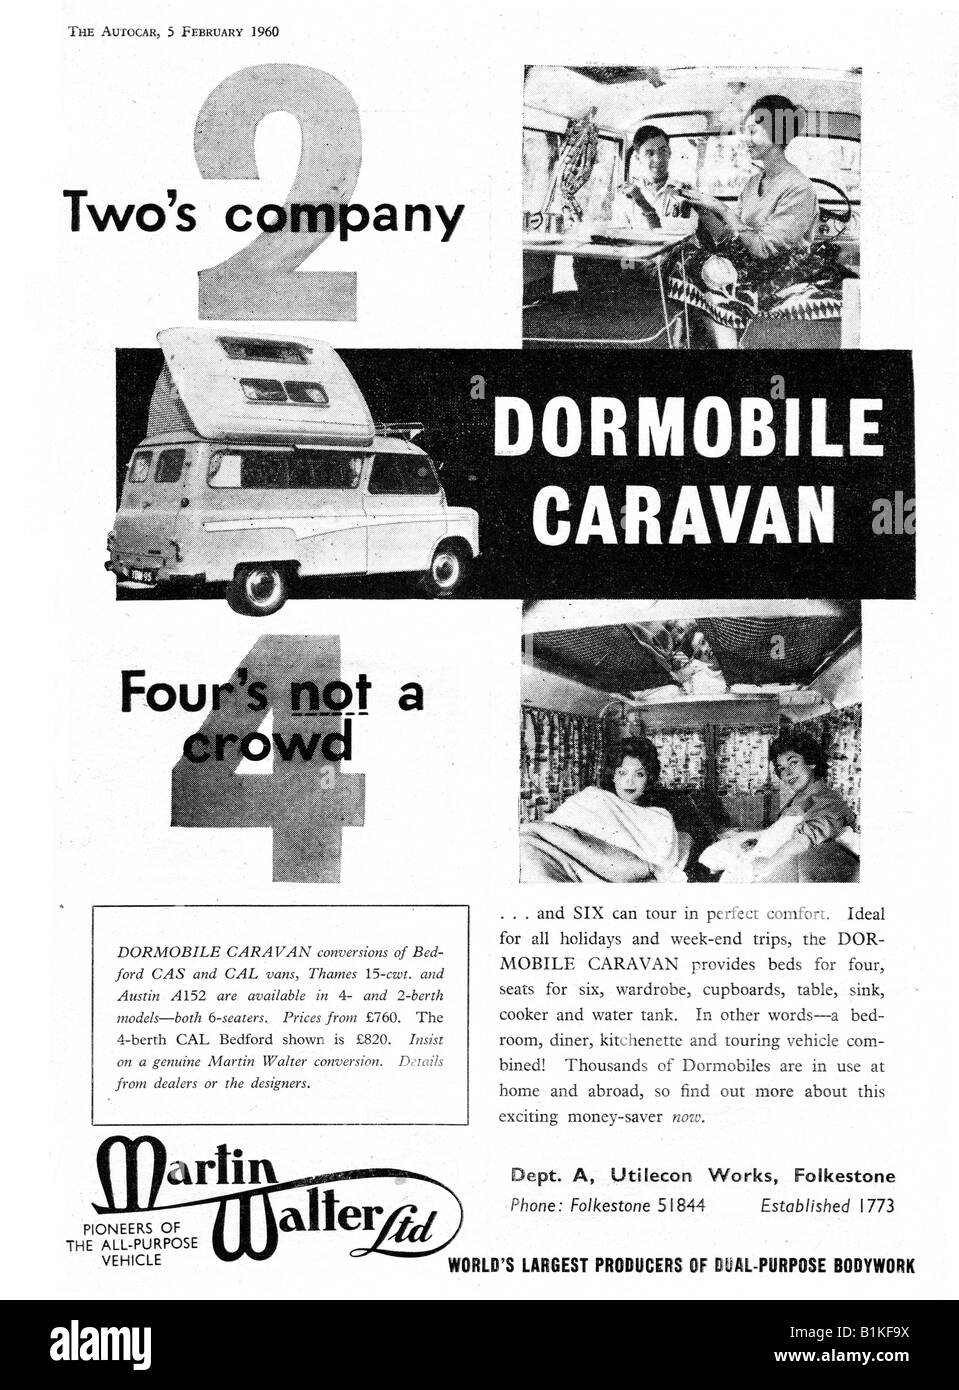 1960 advertisement for Dormobile Motorized Caravans caravanettes conversions from Bedford Vans  FOR EDITORIAL USE ONLY Stock Photo